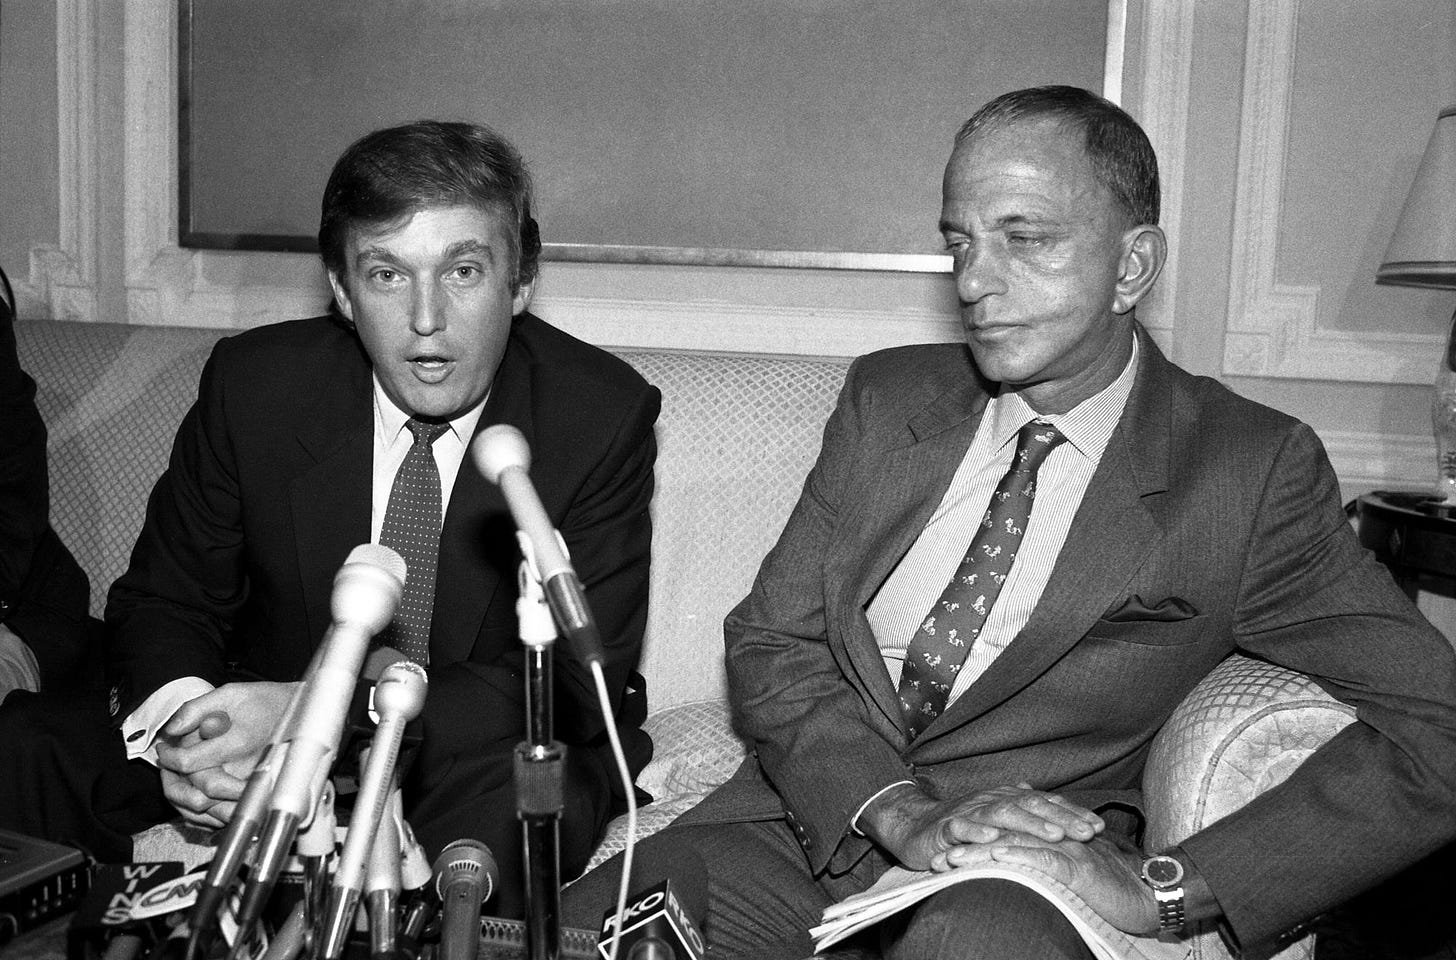 Eavesdropping on Roy Cohn and Donald Trump | The New Yorker